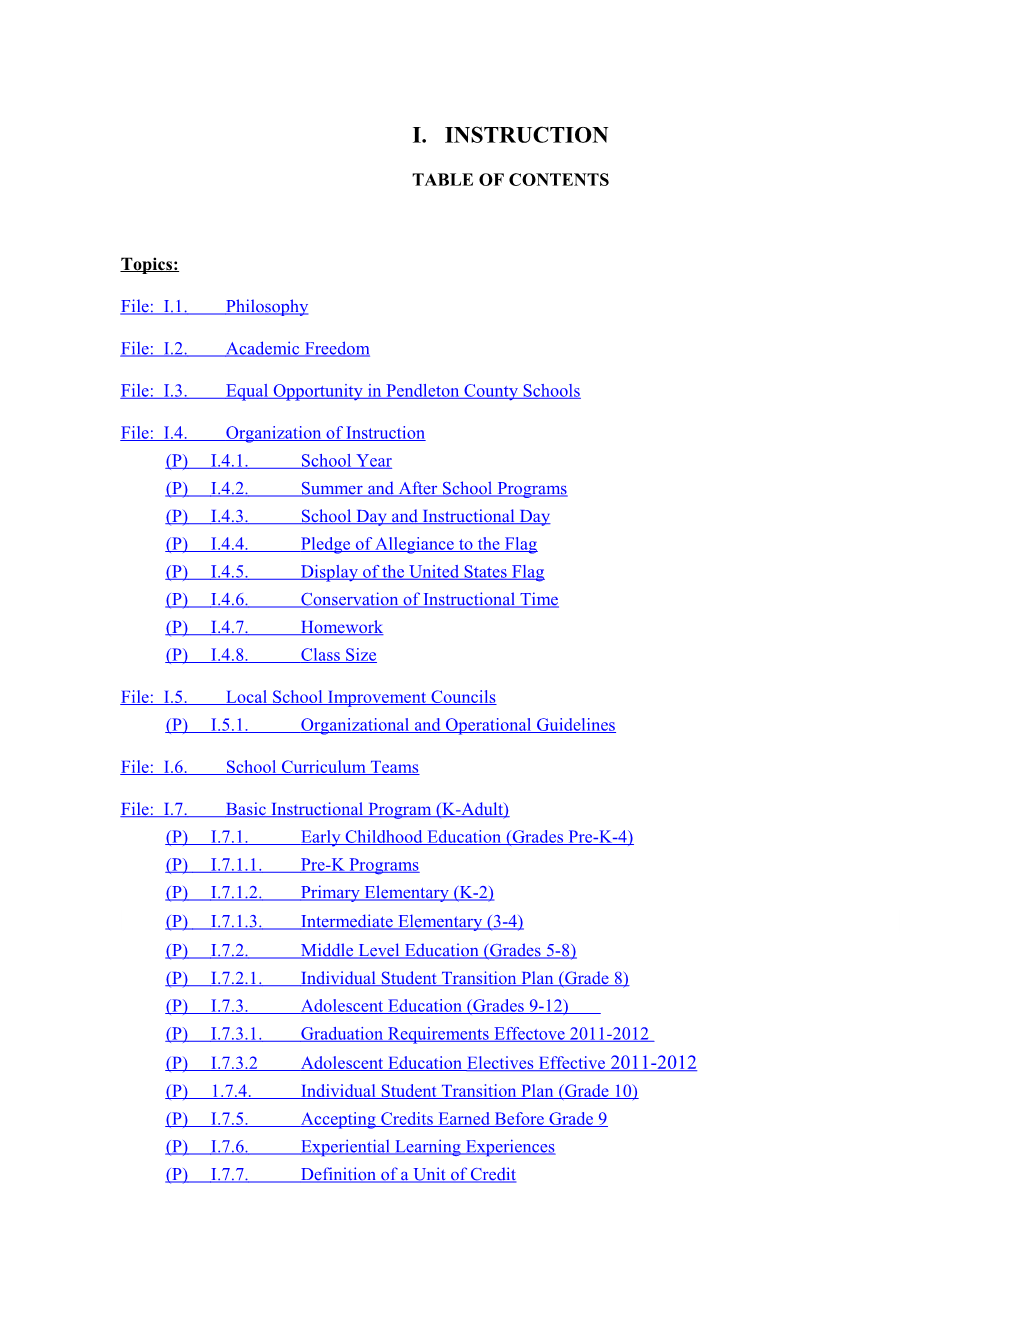 Table of Contents s70